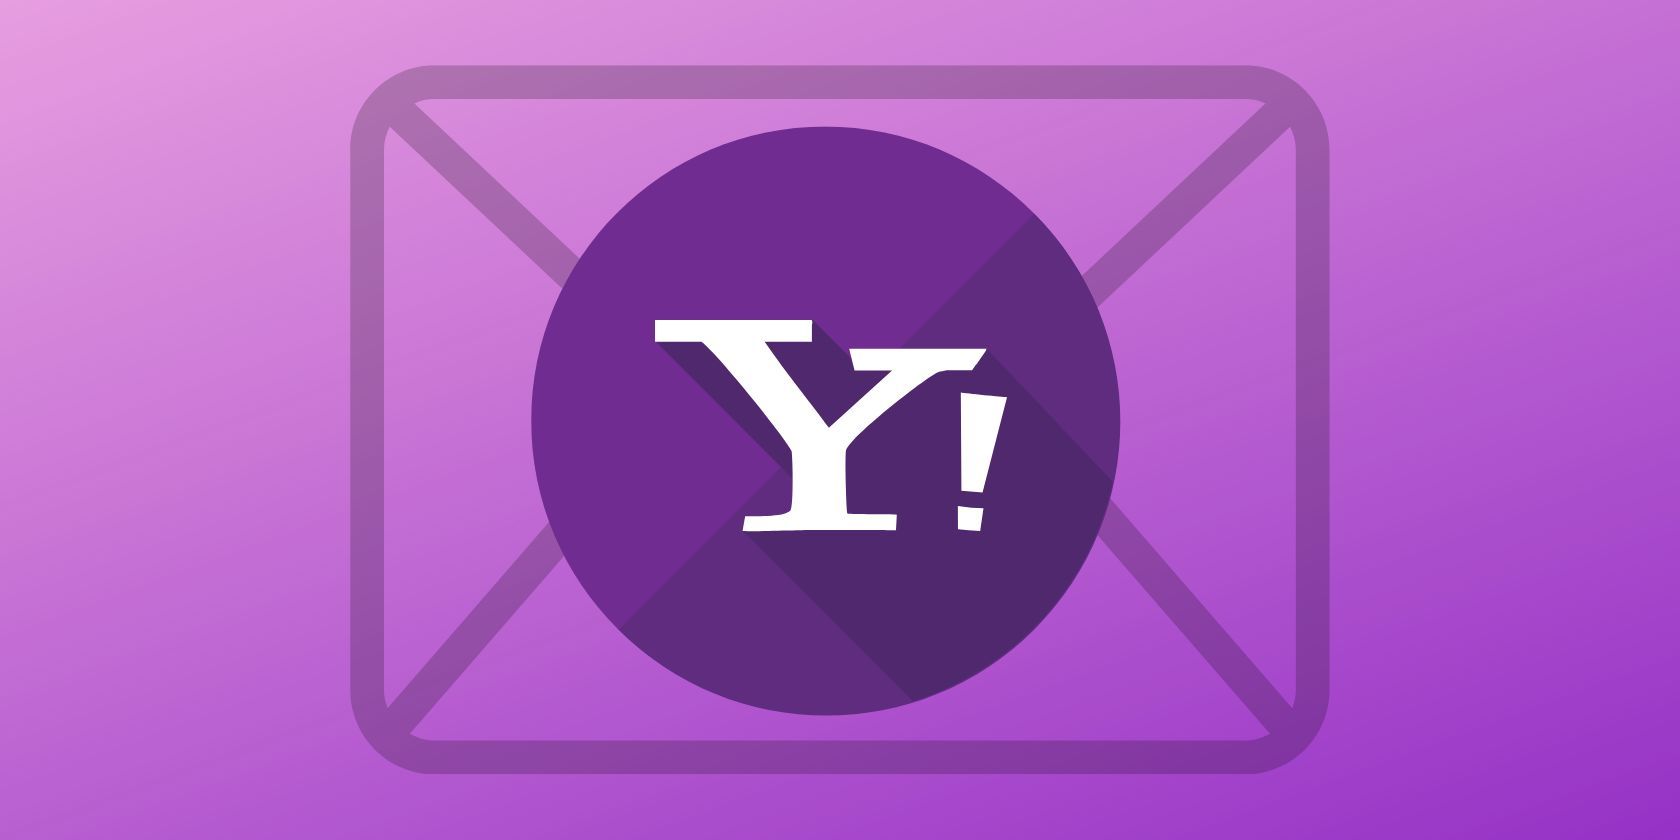 Yahoo logo is seen on a purple background with faded mail symbol